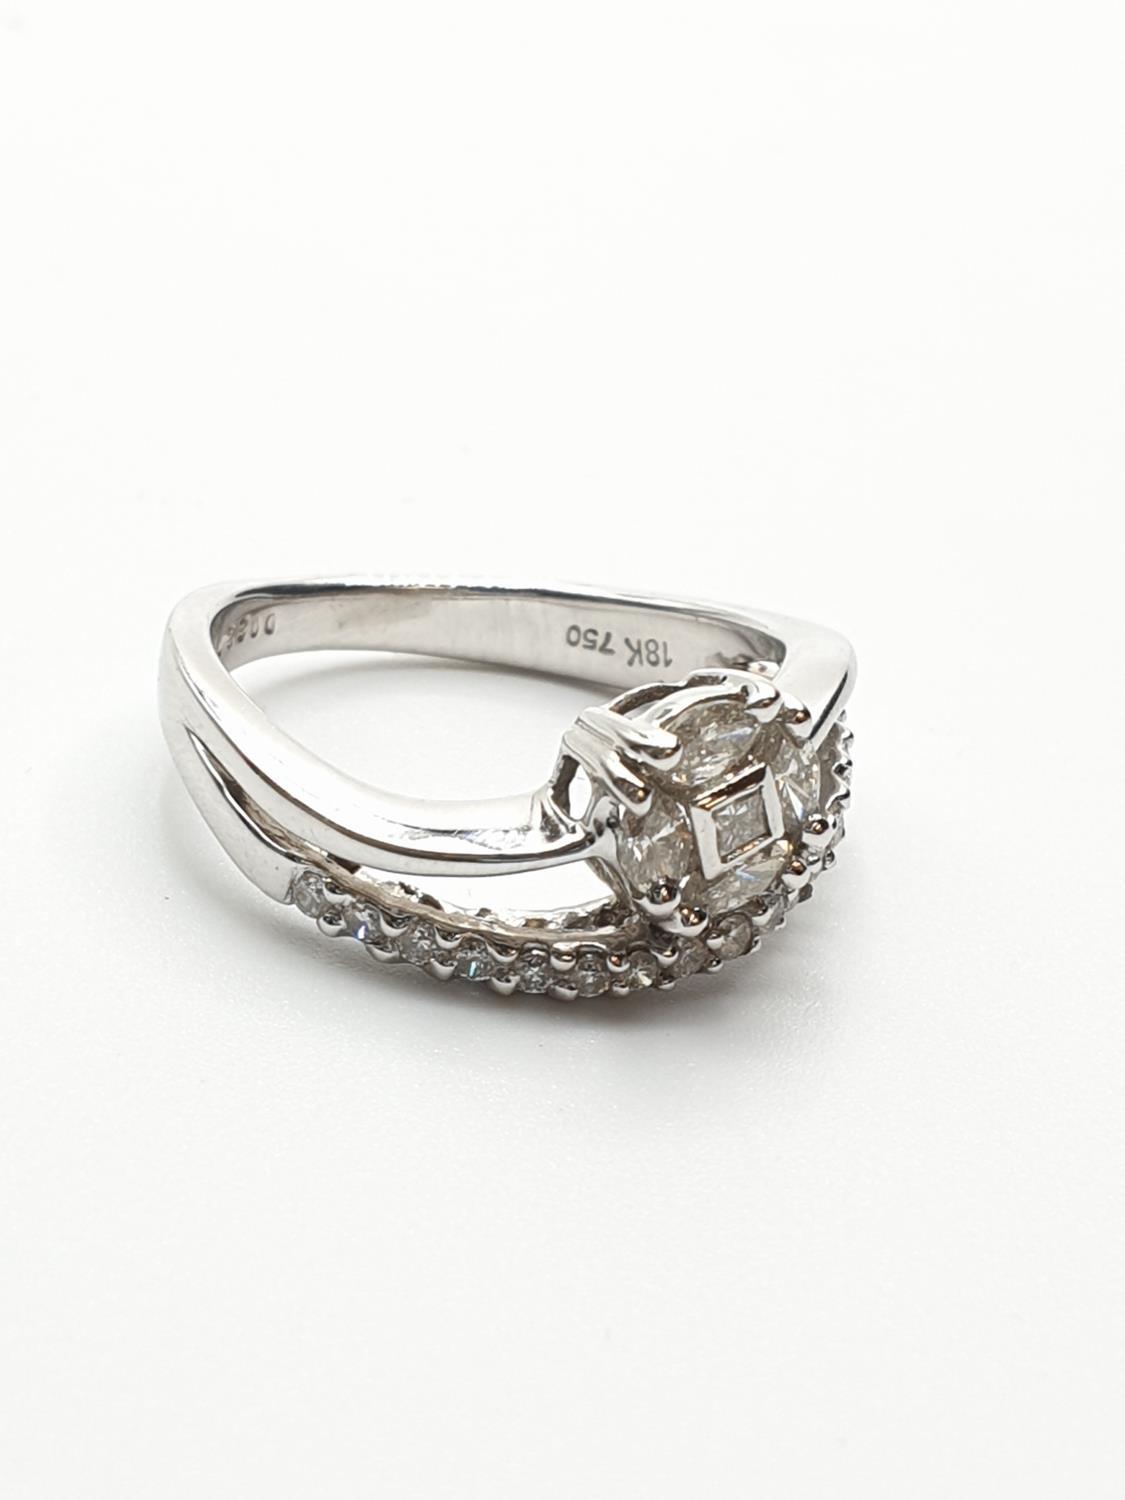 18ct White Gold Diamond Ring with 0.34ct diamonds, weight 4.5g and K/L - Image 2 of 5